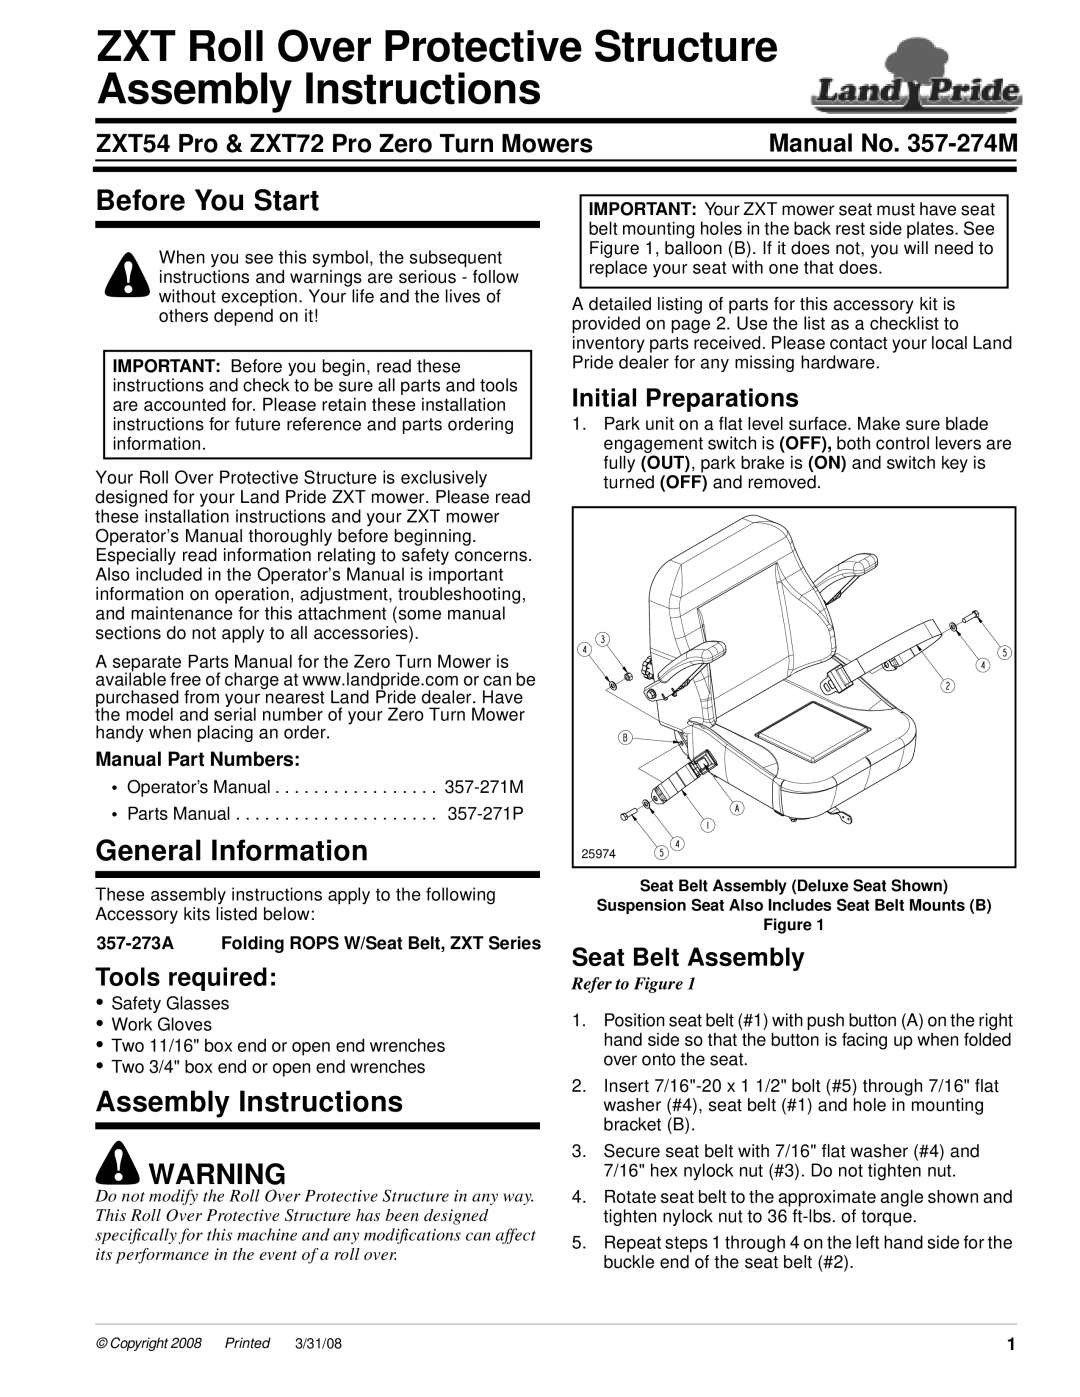 Land Pride ZXT54 Pro, ZXT72 Pro installation instructions Before You Start, General Information, Assembly Instructions 